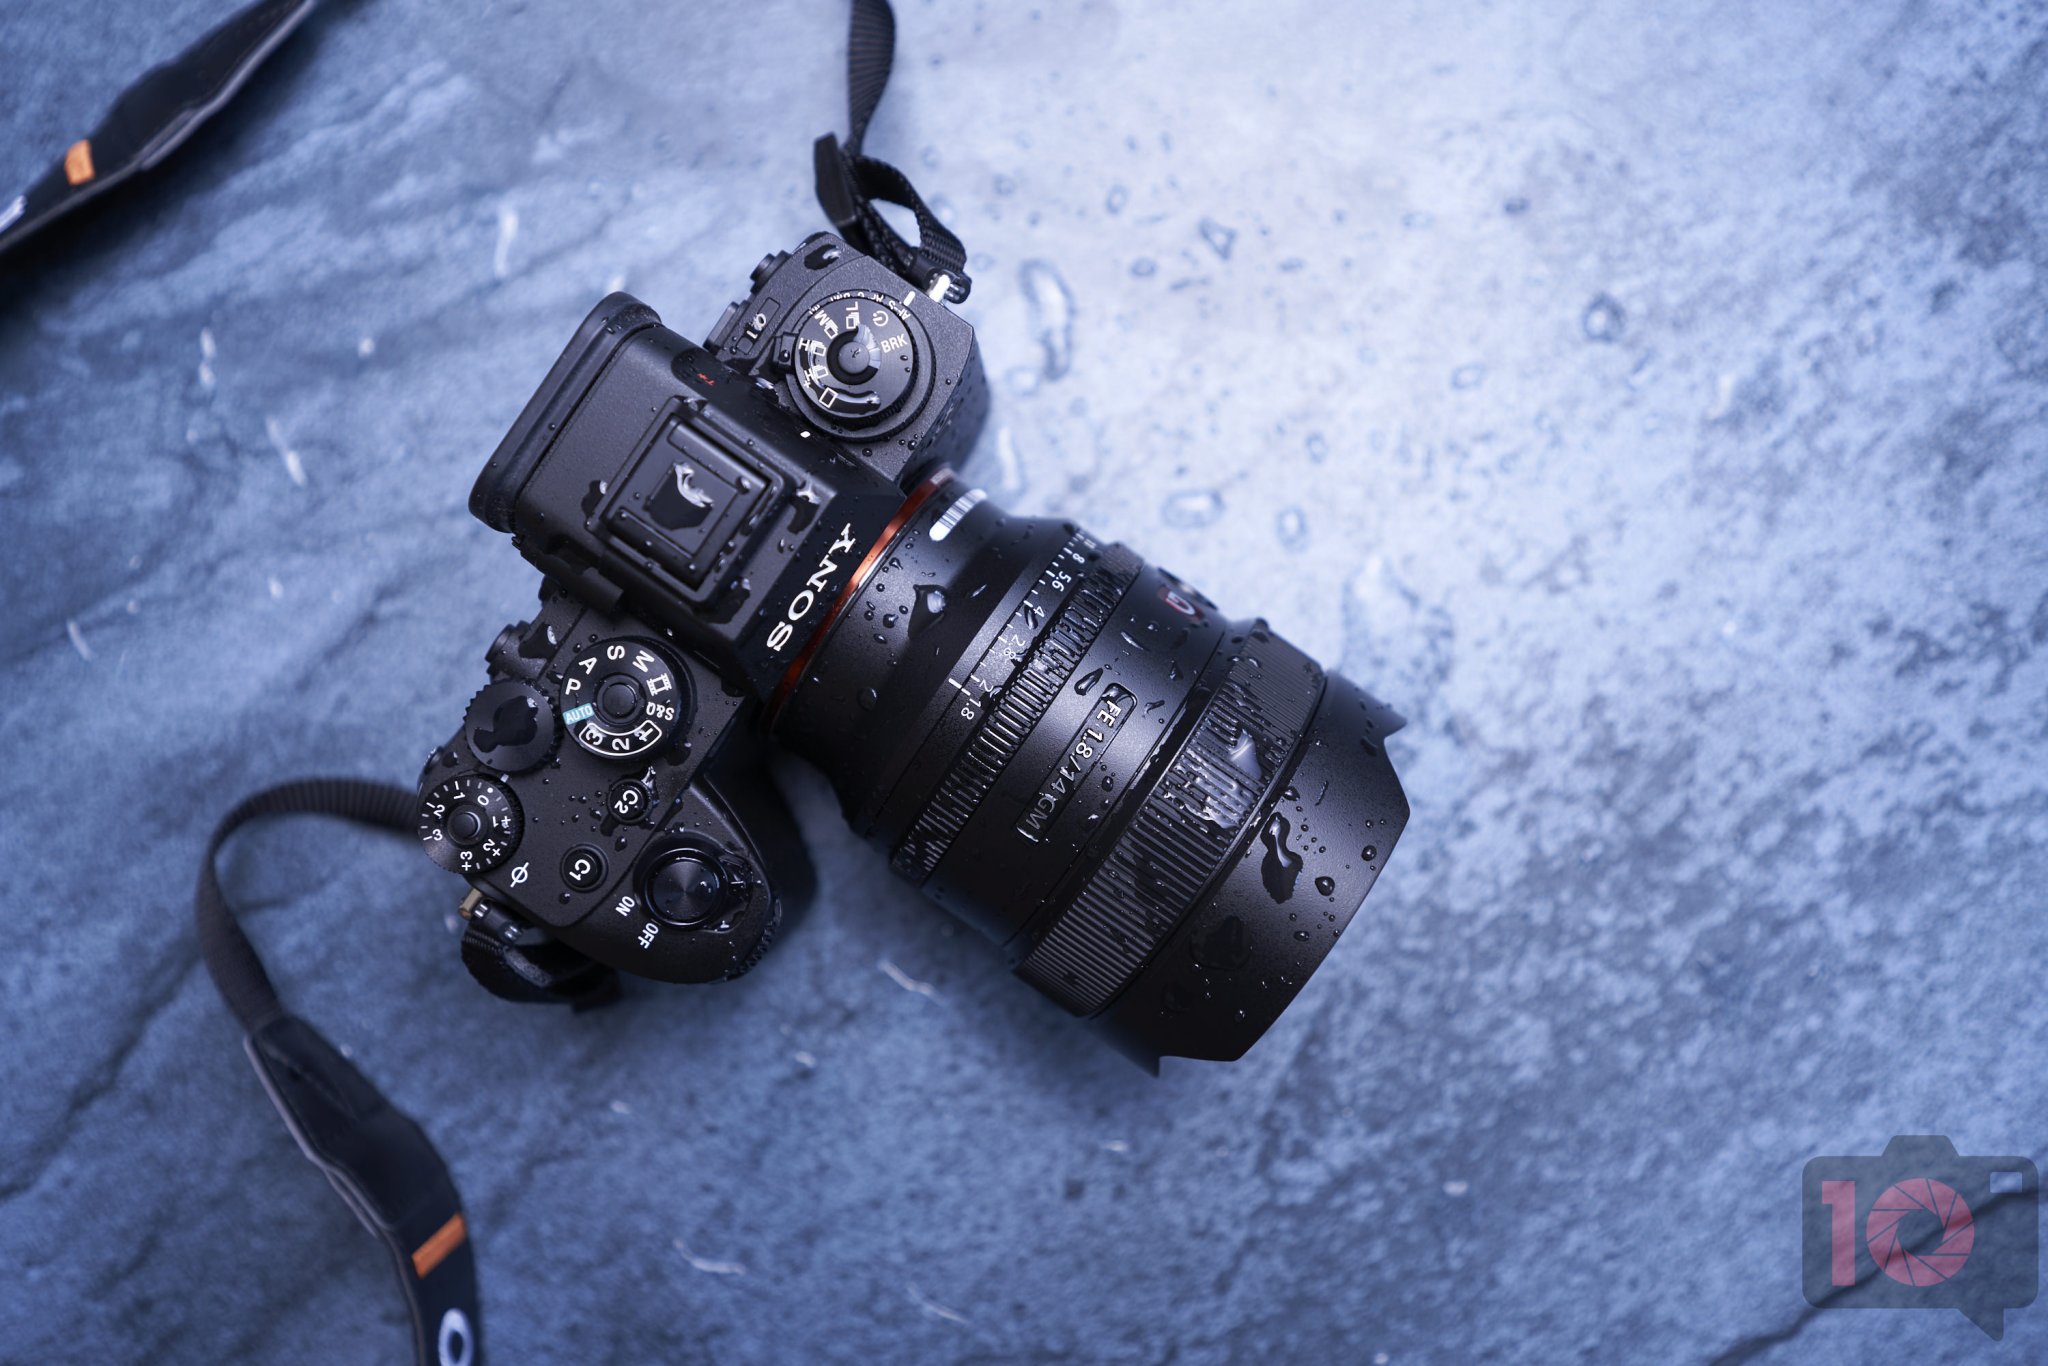 Small Lens, Big, Beautiful Colors. Sony 14mm f1.8 G Master Review